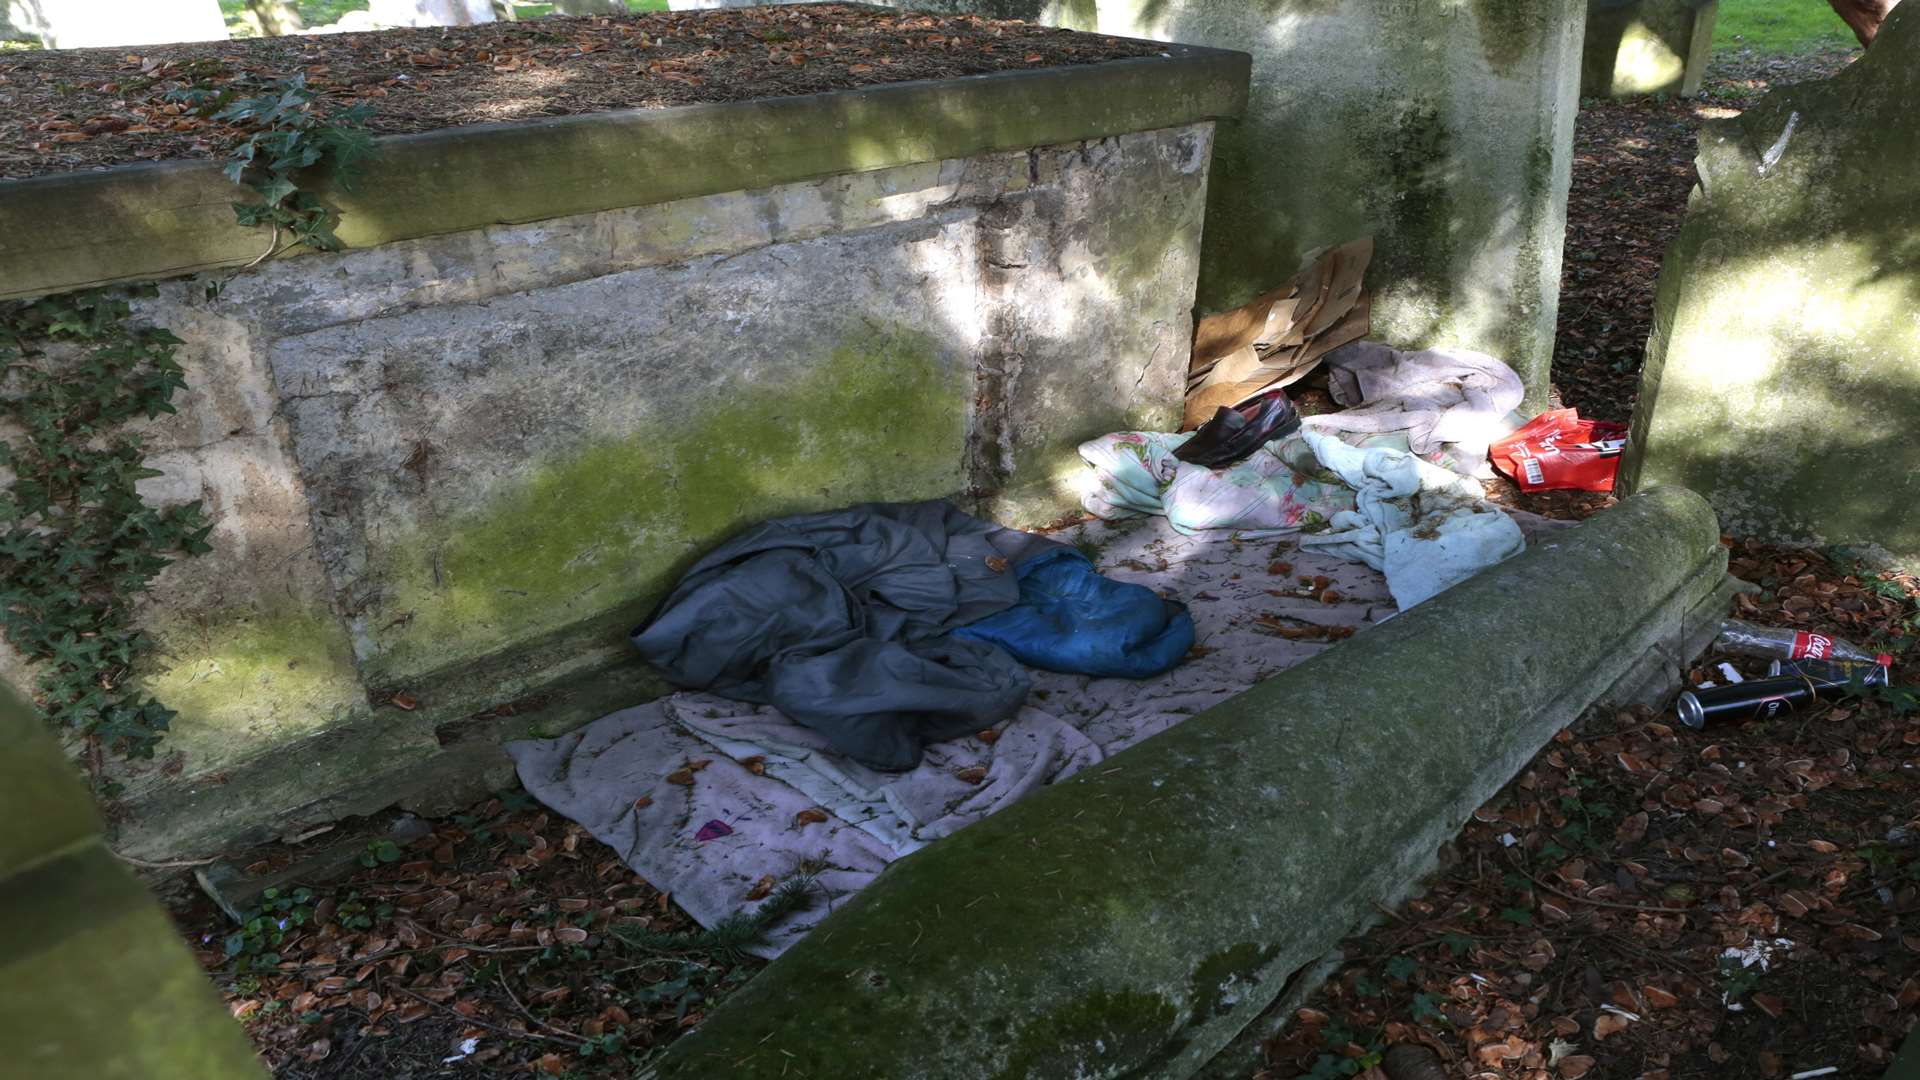 Homeless person's bed for the night at All Saints Church, Maidstone